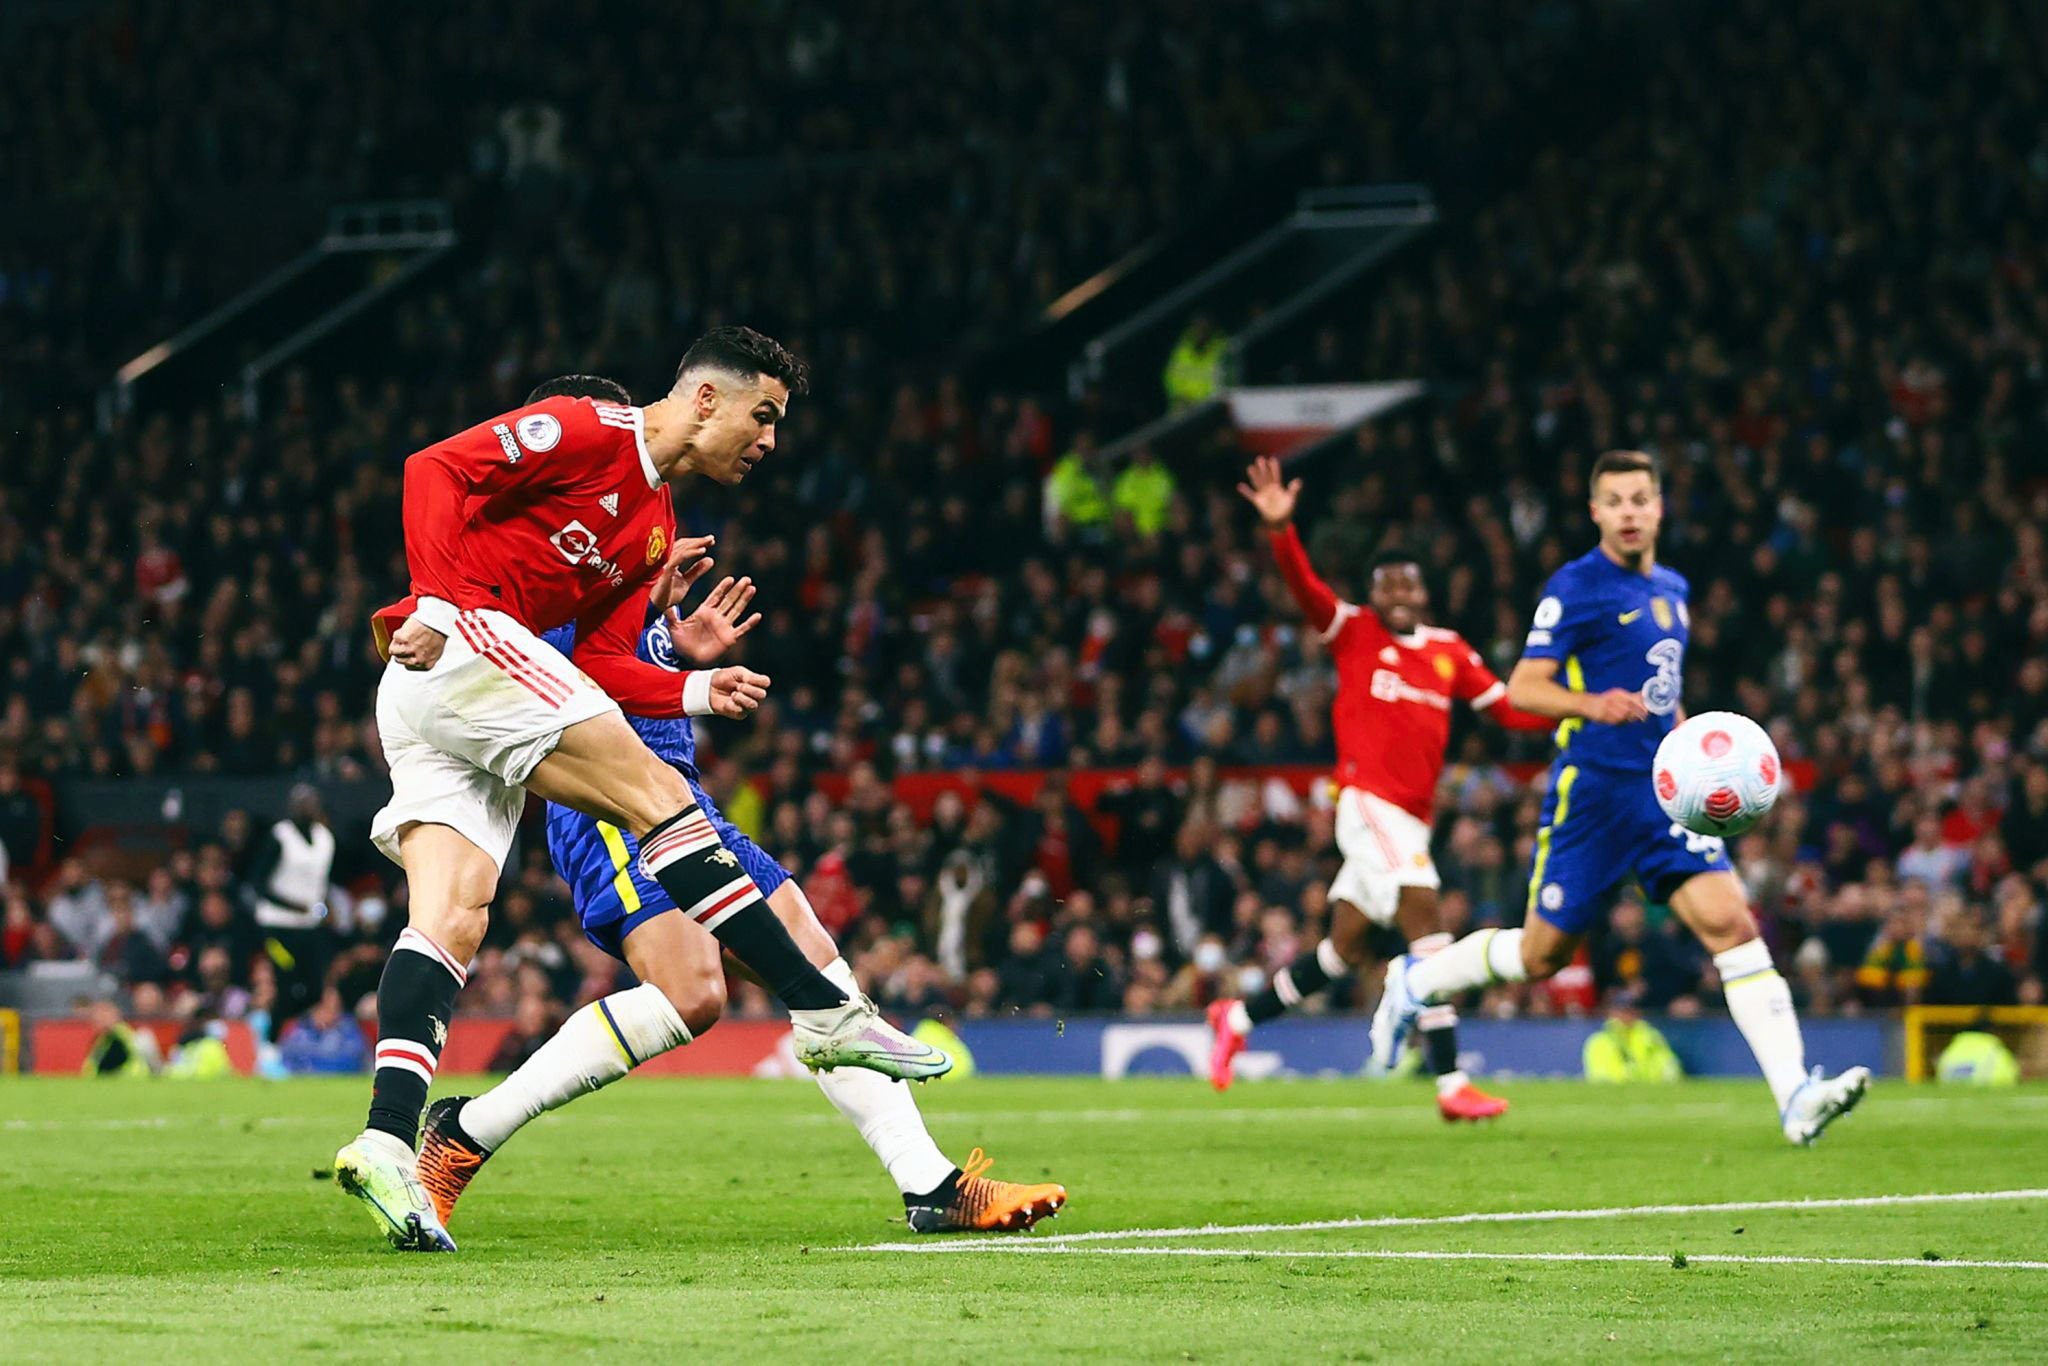 Premier League: Cristiano Ronaldo's brilliant equaliser saves Man United in a DISAPPOINTING 1-1 draw against Chelsea at Old Trafford, Watch Manchester United vs Chelsea HIGHLIGHTS